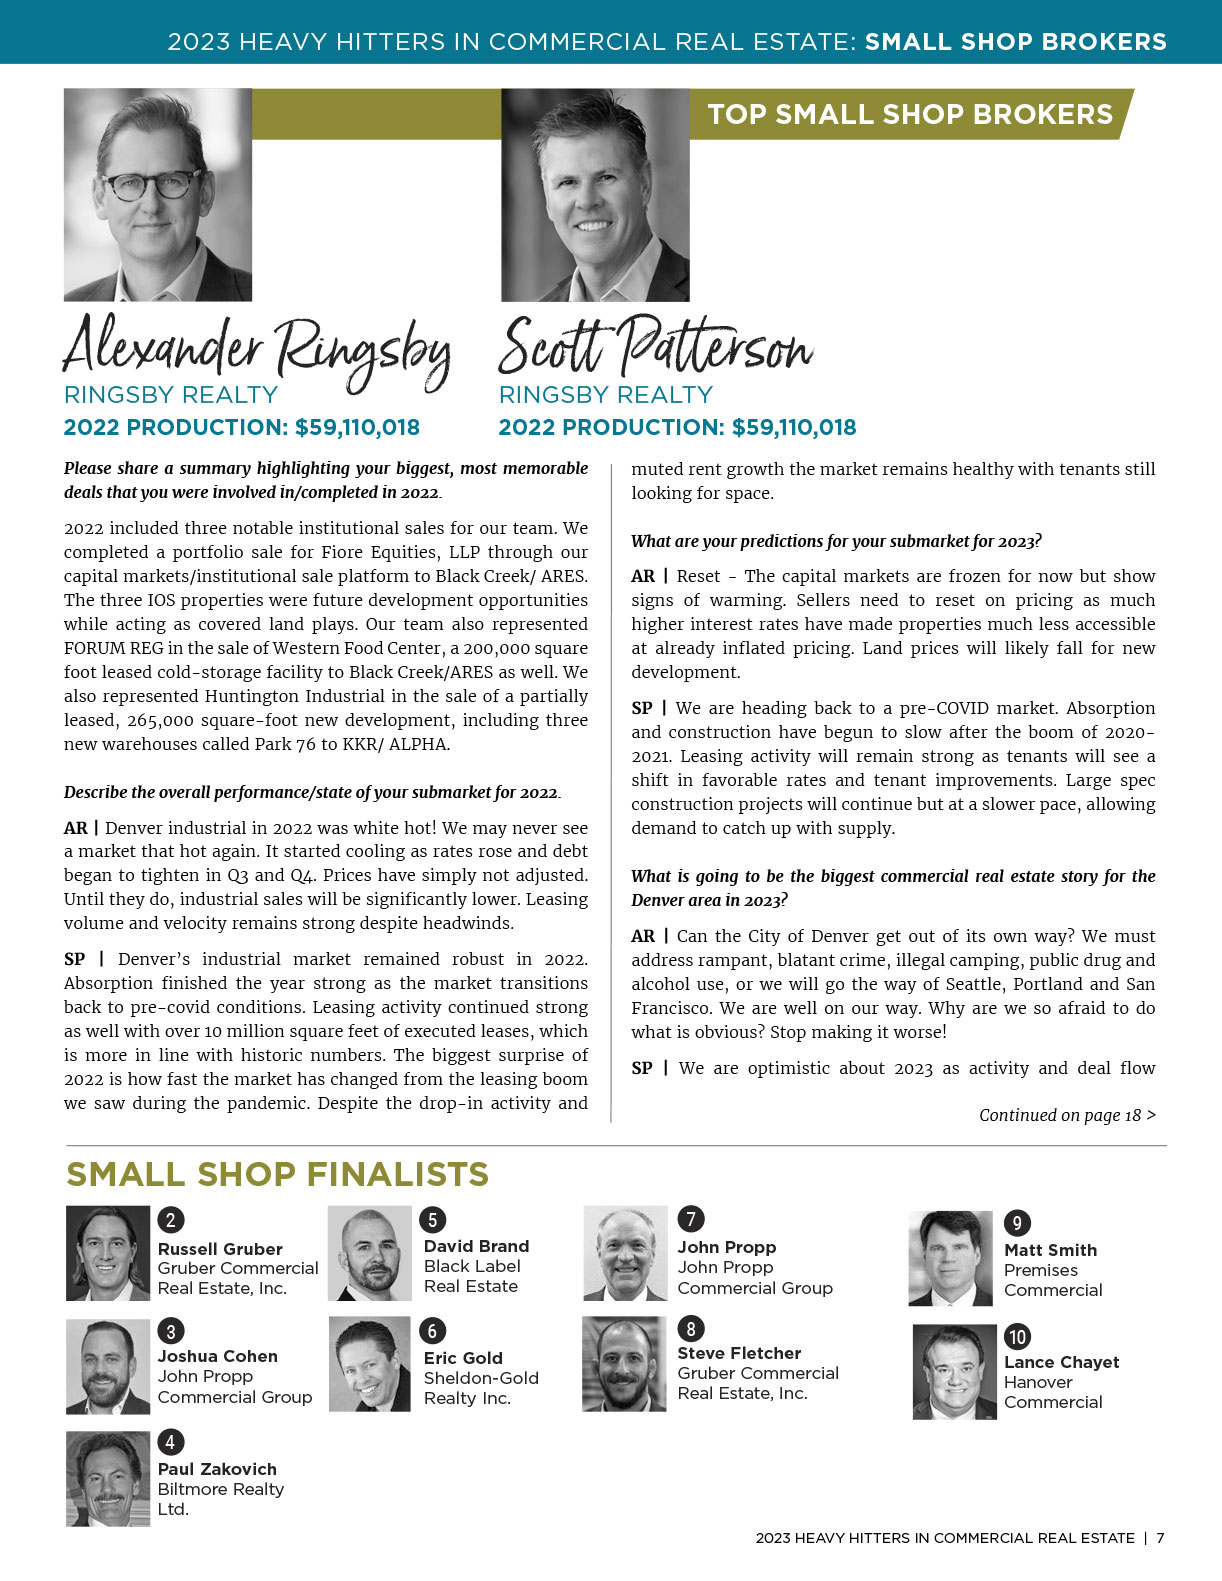 Alexander Ringsby and Scott Patterson won the 2023 Heavy Hitters award for Top Small Shop Brokers.